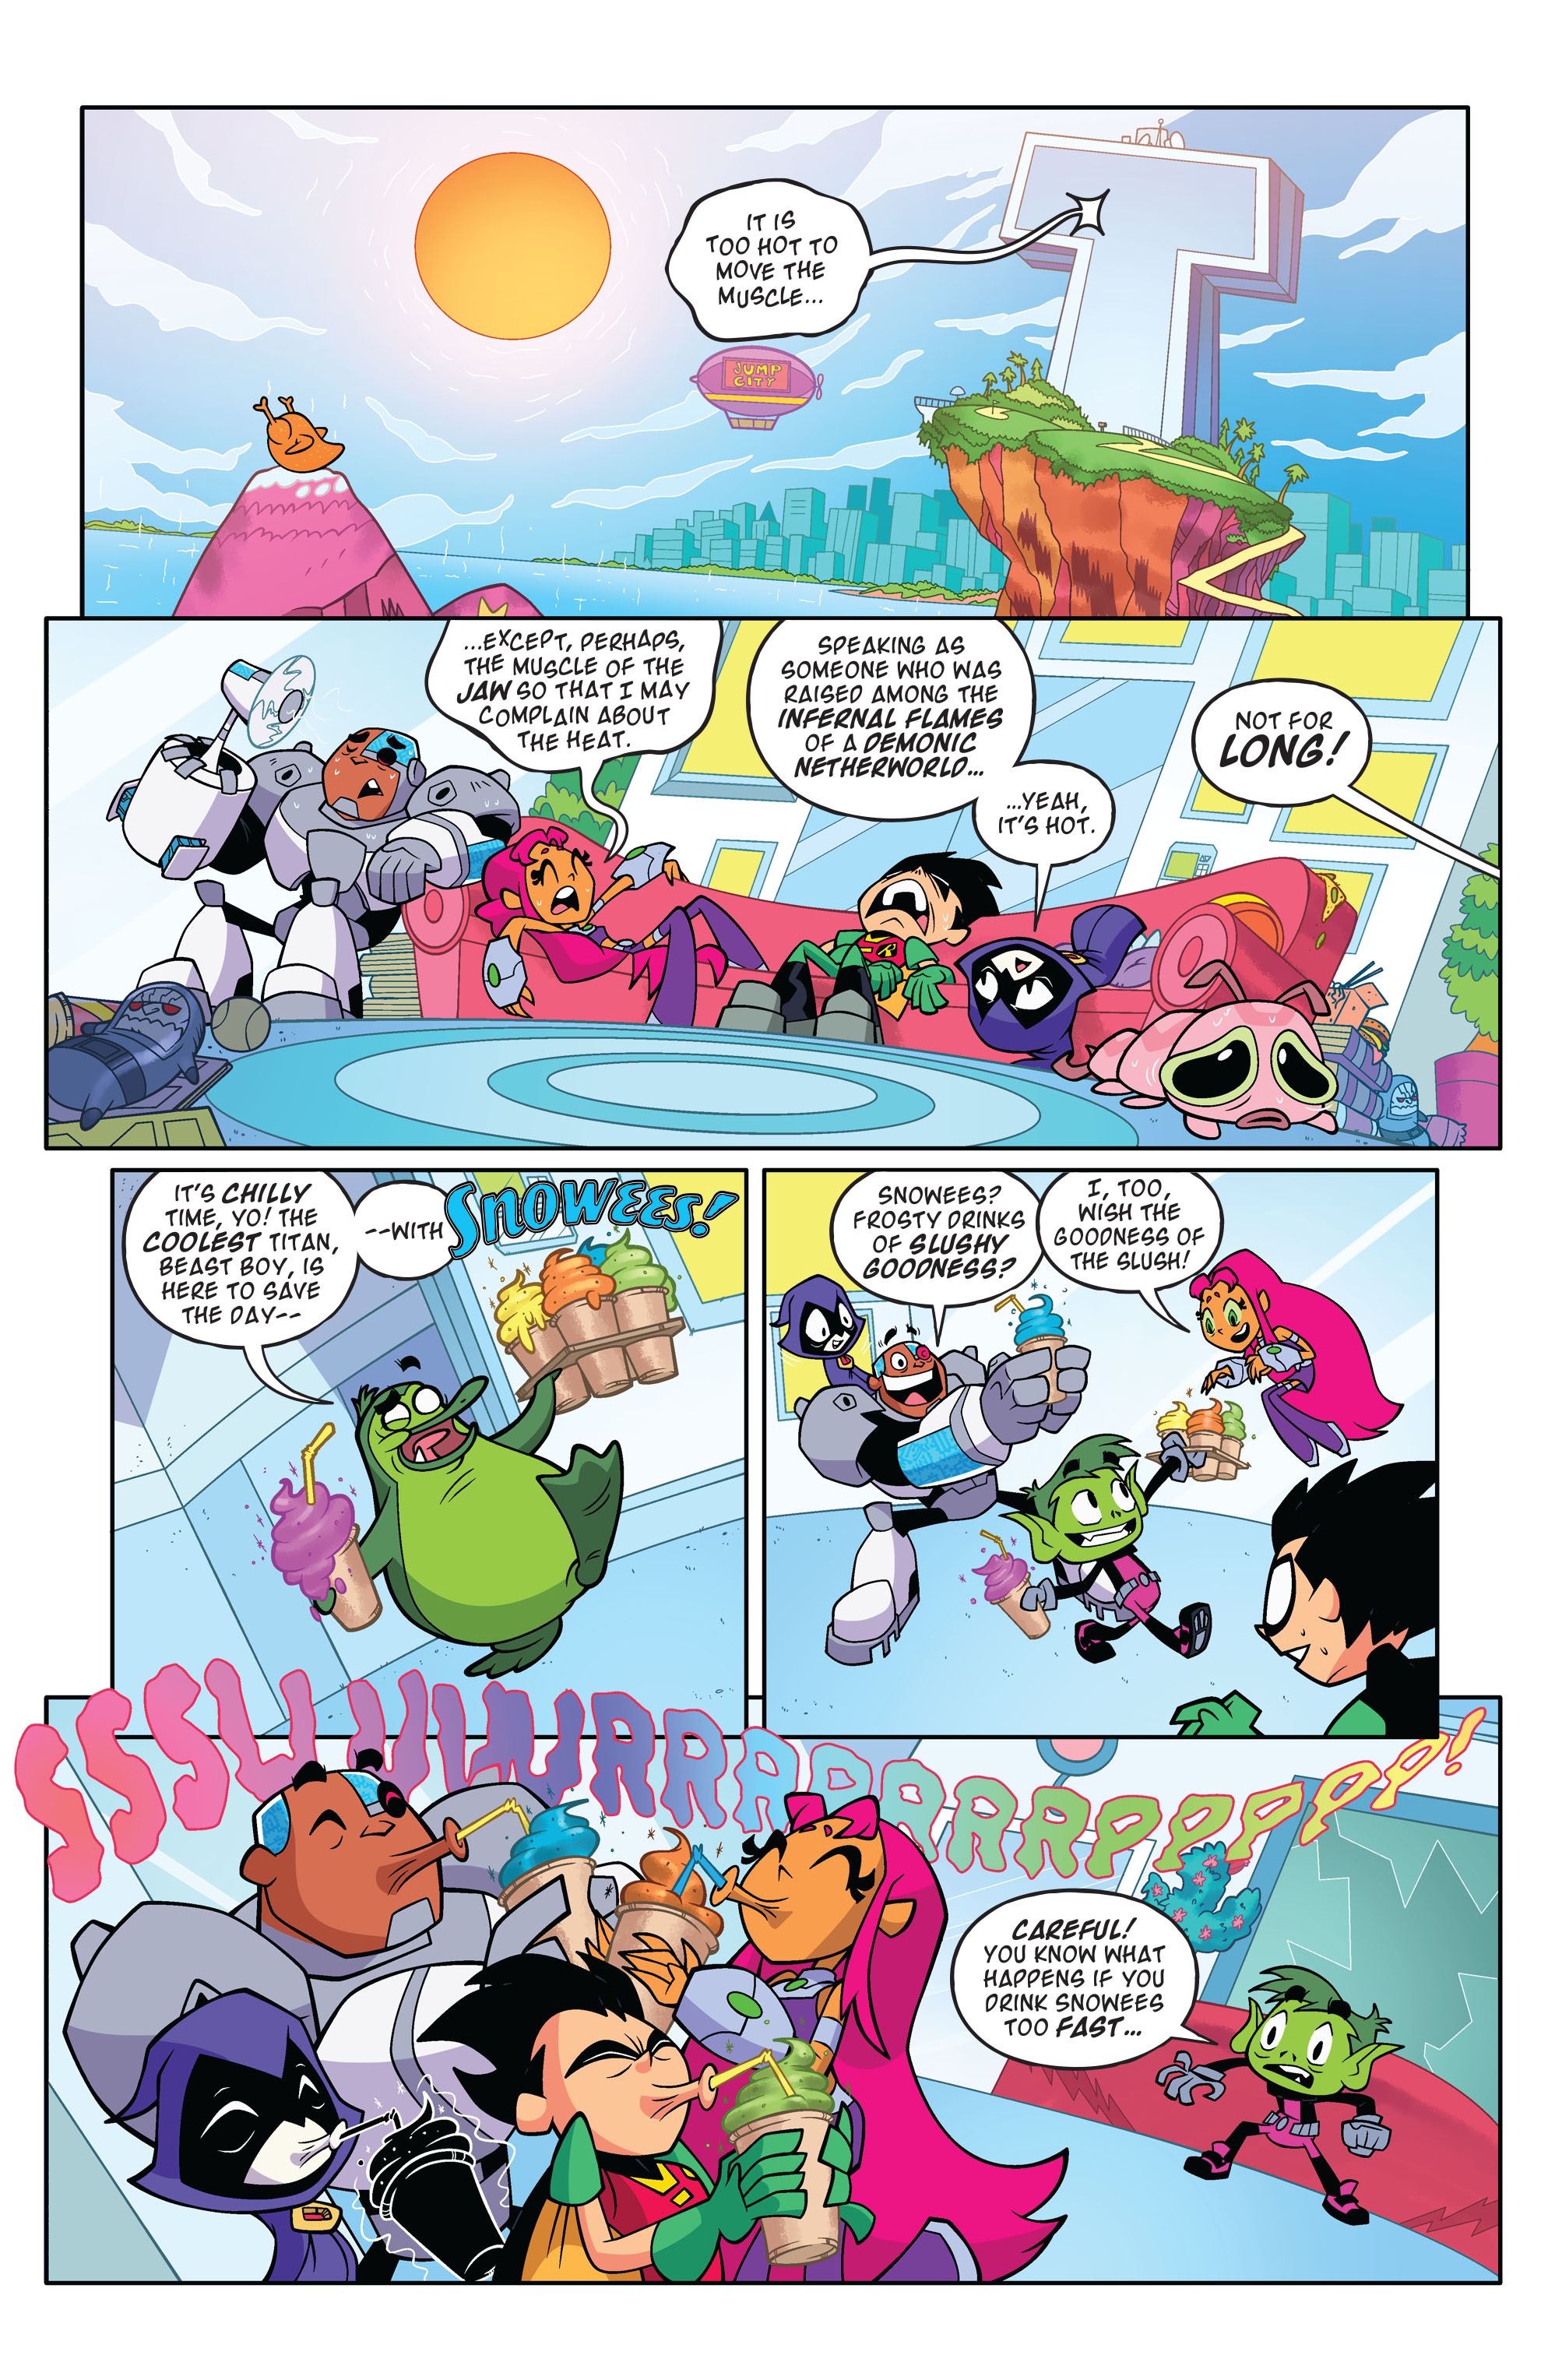 Teen Titans Go!: Booyah! (2020-): Chapter 4 - Page 2